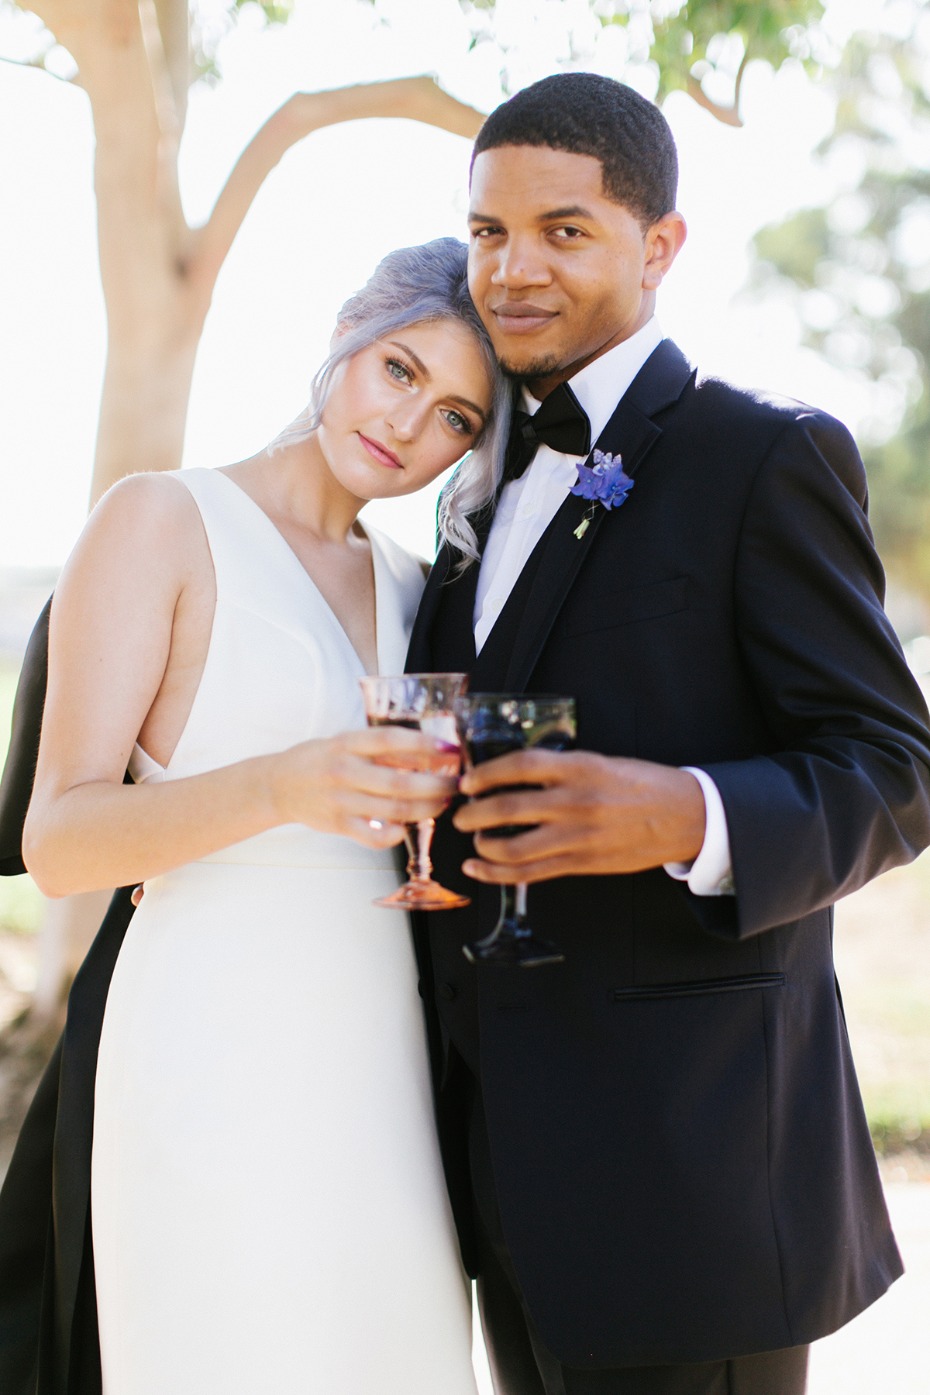 Cheers to these Modern lavender wedding ideas